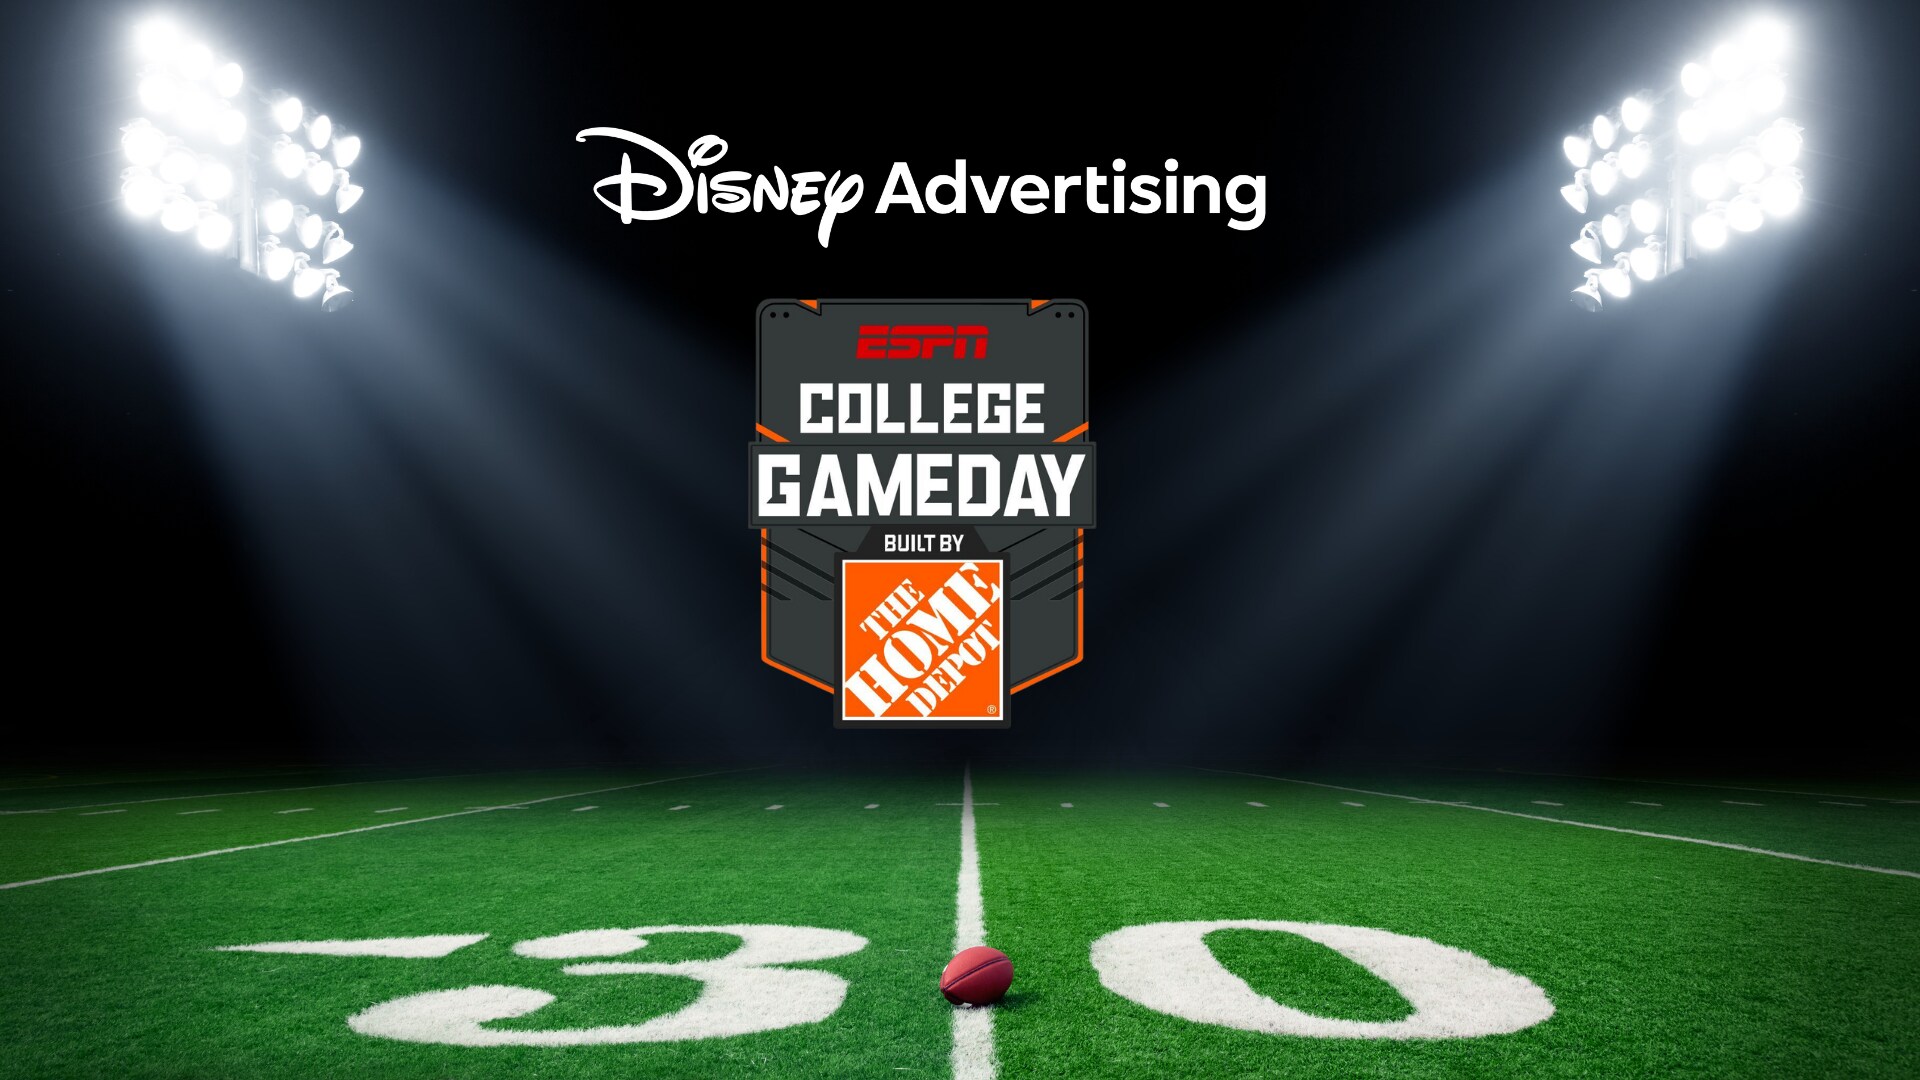 Disney Advertising Celebrates ESPN’s College GameDay Built by The Home Depot with New Official Sponsor Inspire Brands, and Strong Slate of Returning Multi-Year Sponsors 